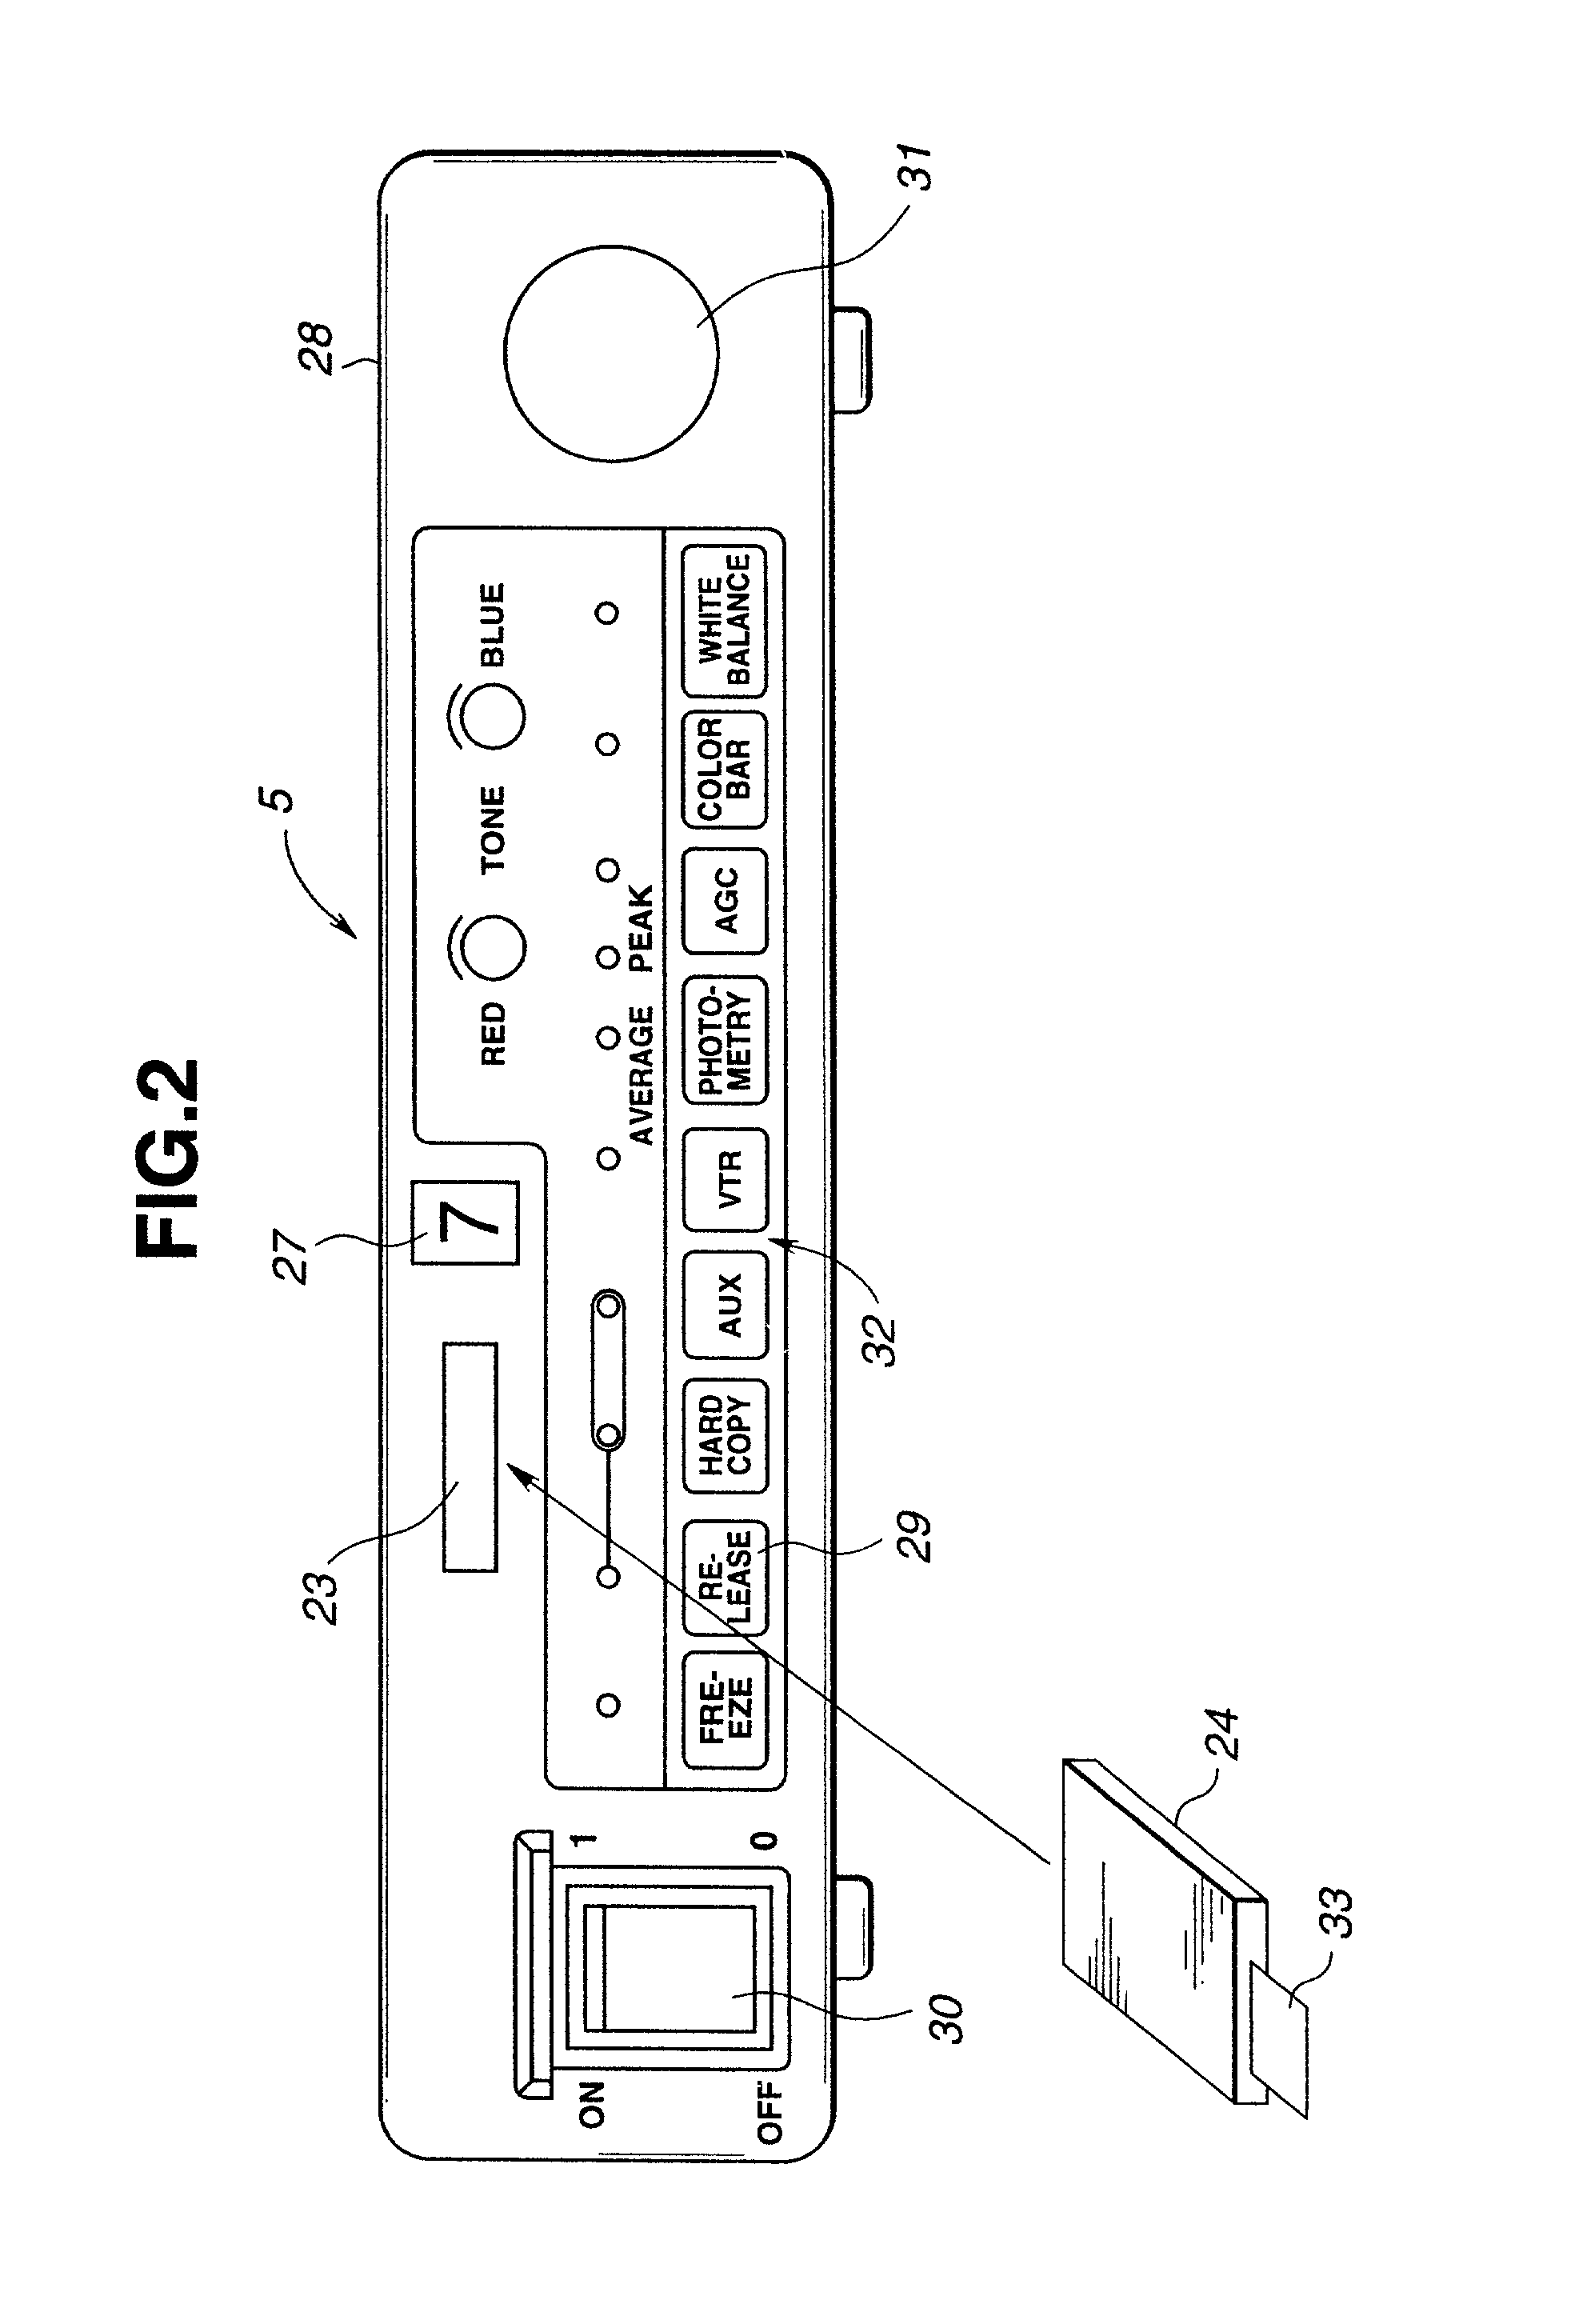 Endoscopic imaging system making it possible to detachably attach expansion unit having external expansion facility and add expansion facility for improving capability of system